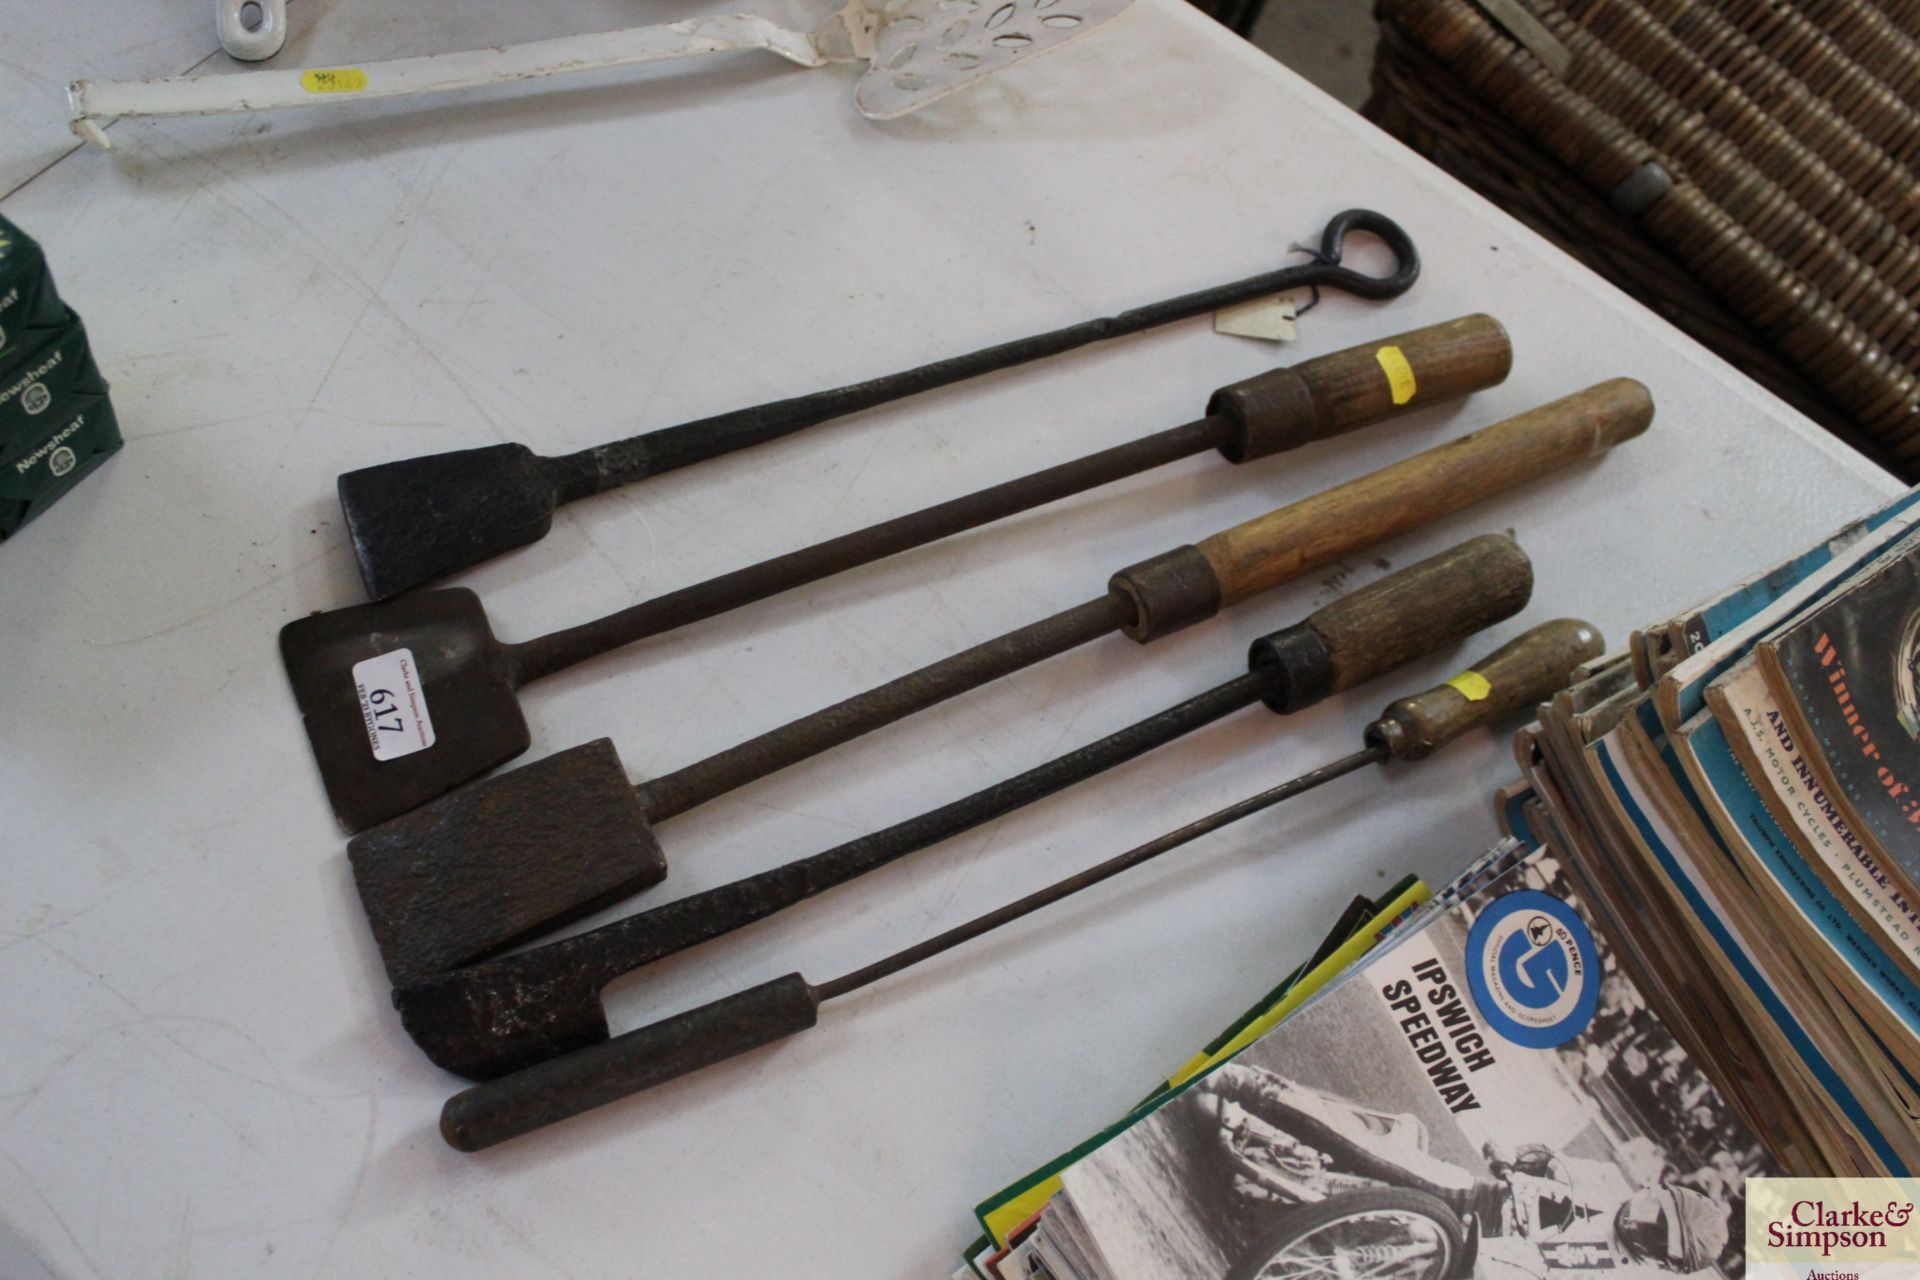 Four various docking irons and a goffering iron